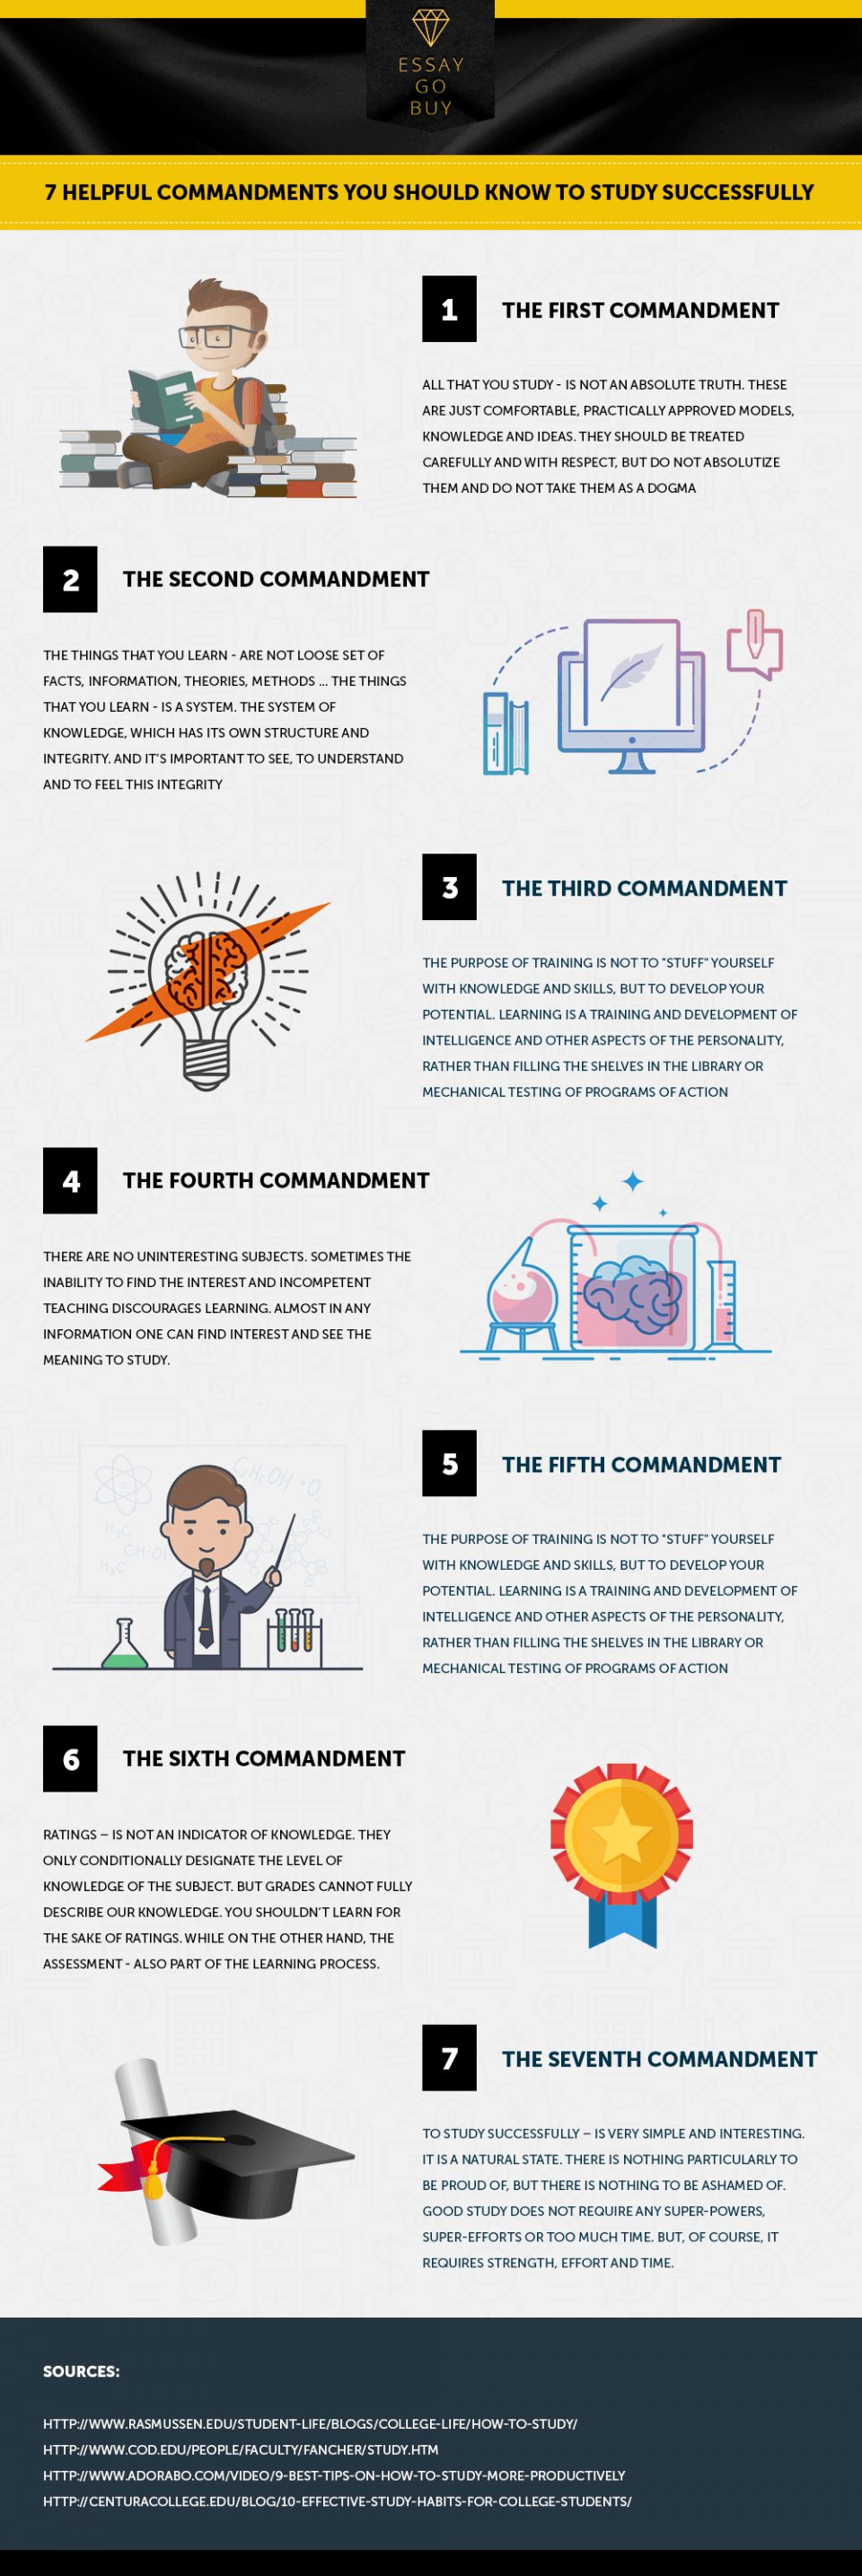 7 Helpful Commandments You Should Know to Study Successfully Infographic